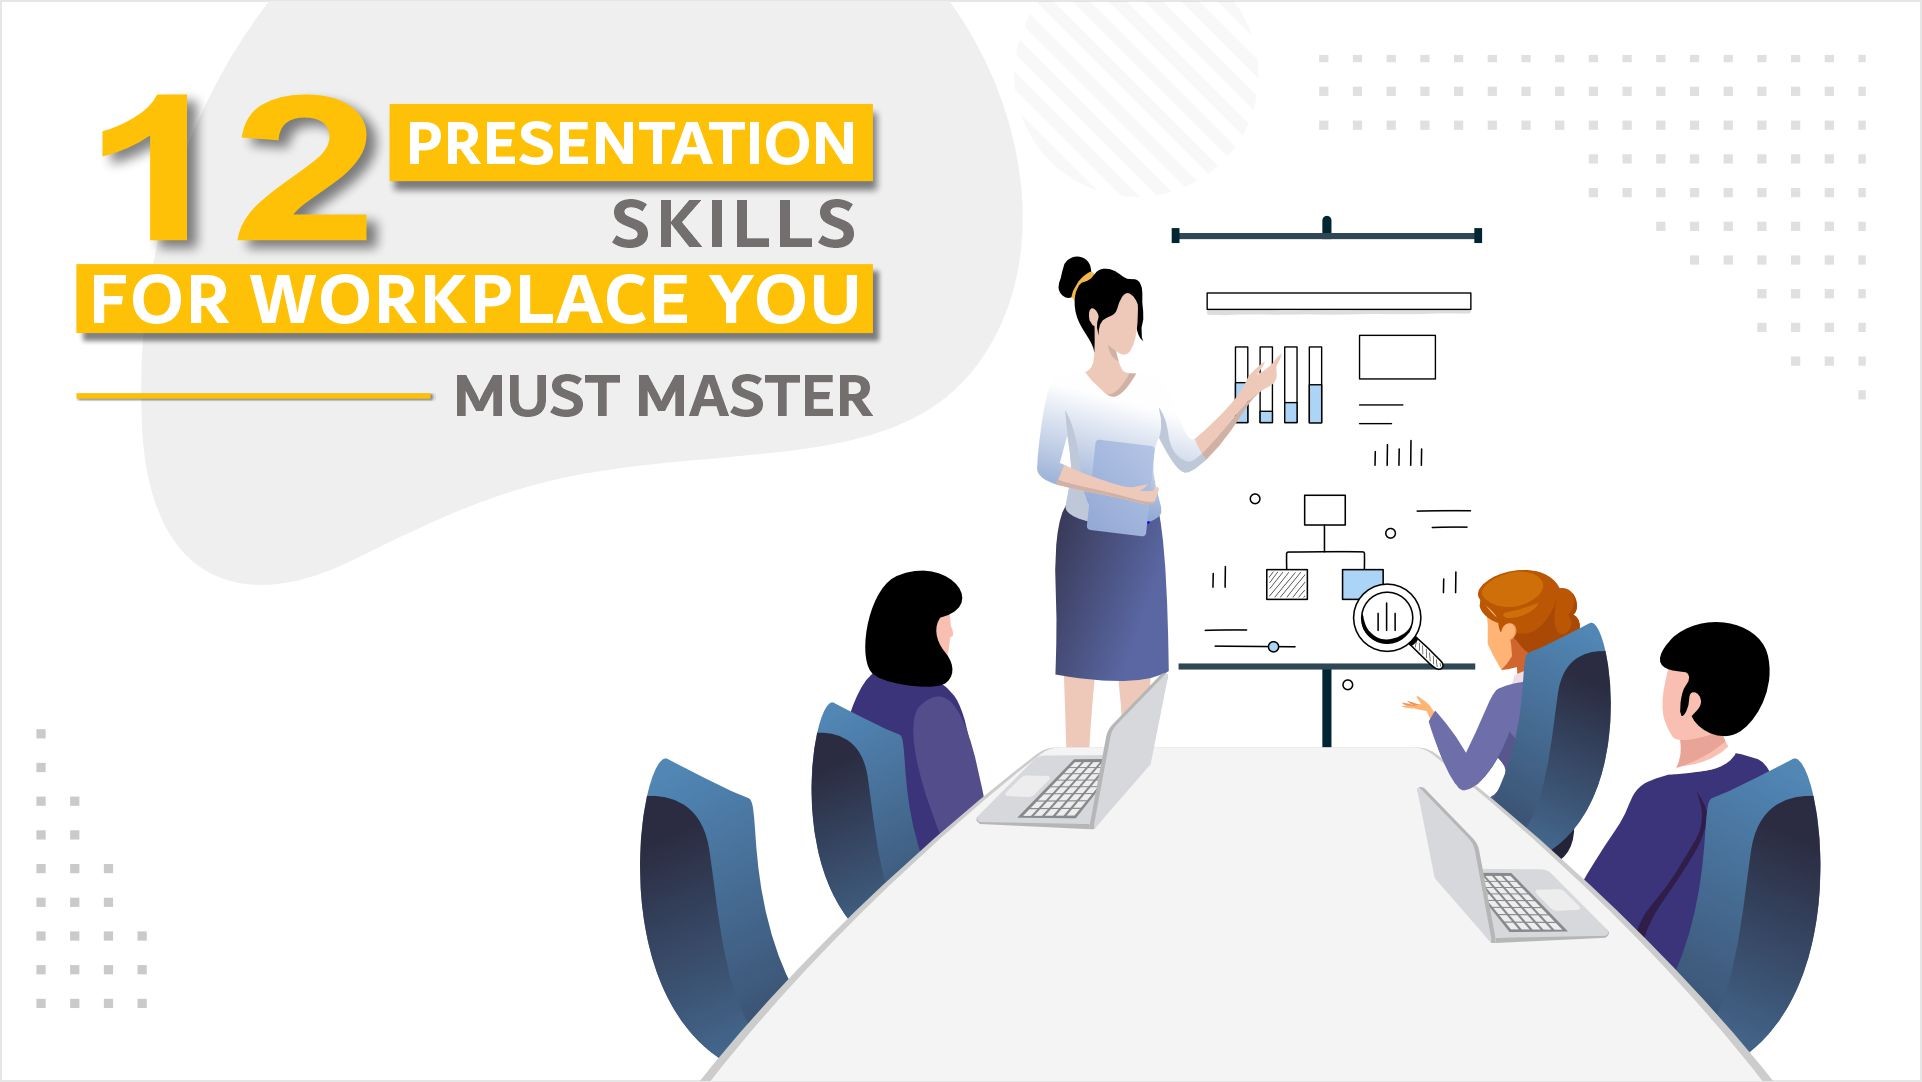 12 Presentation Skills for Workplace You Must Master